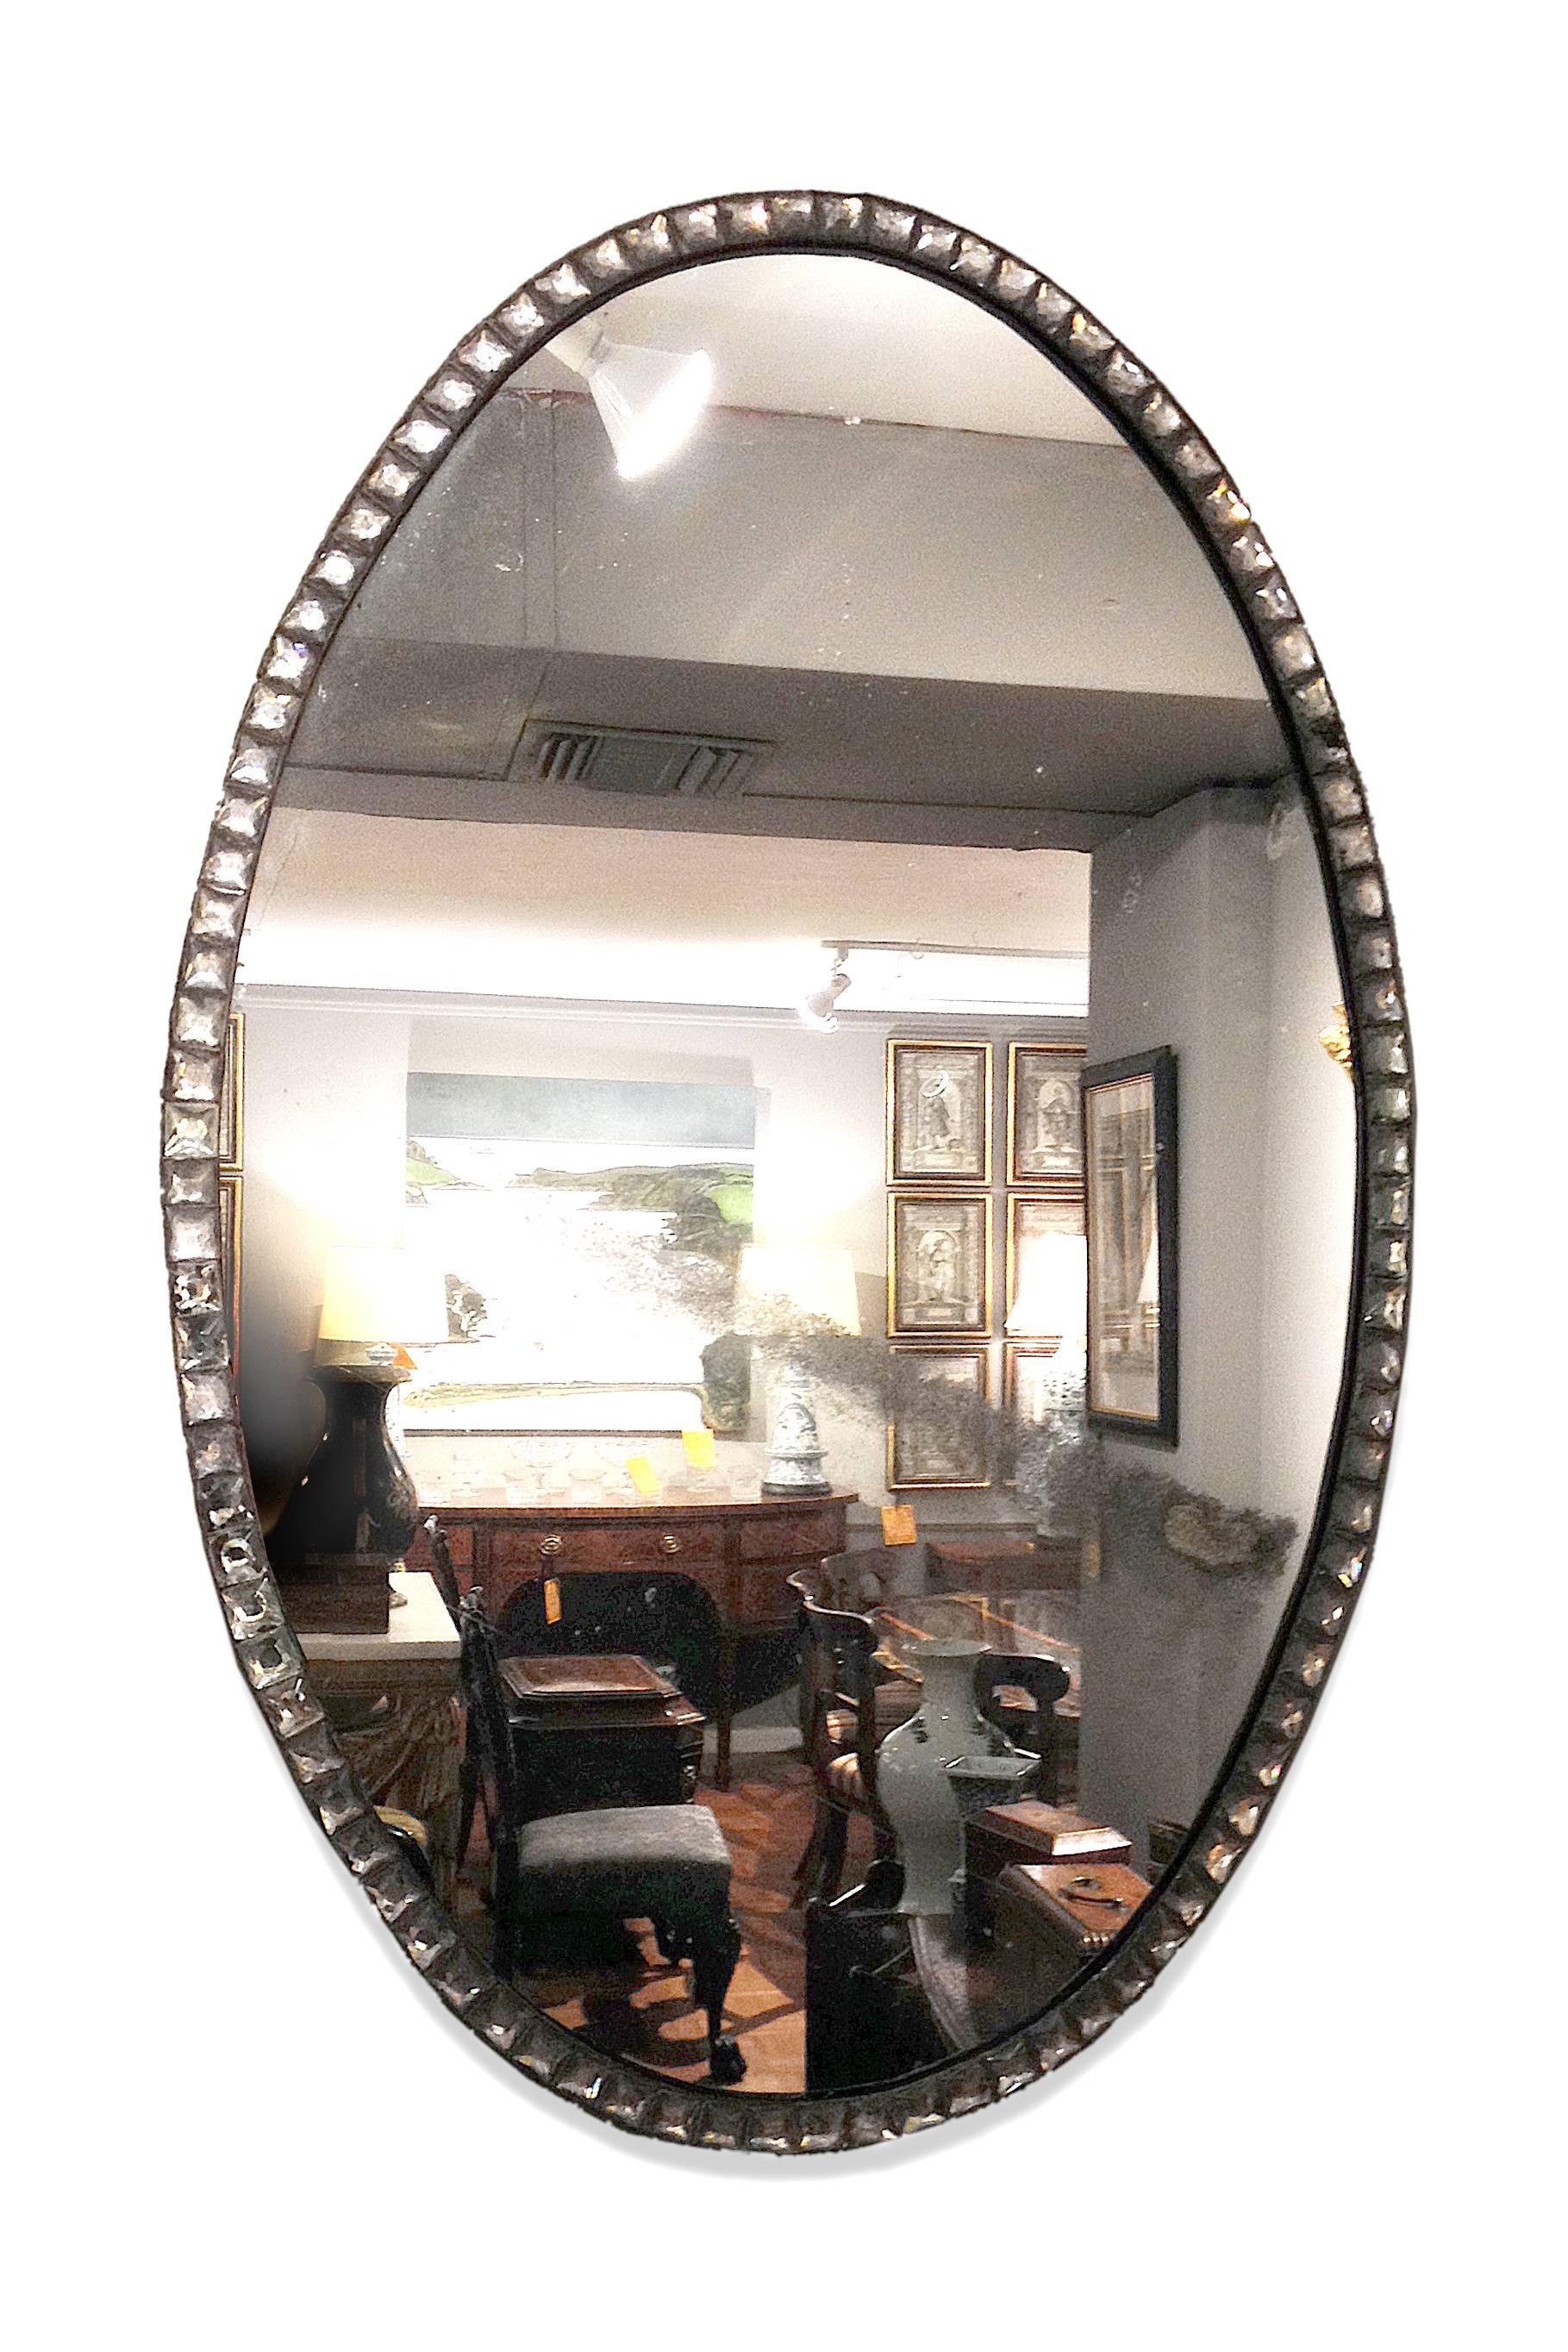 18th century oval clear cut-glass mirror. The faceted clear glass gems set into a metal oval frame.